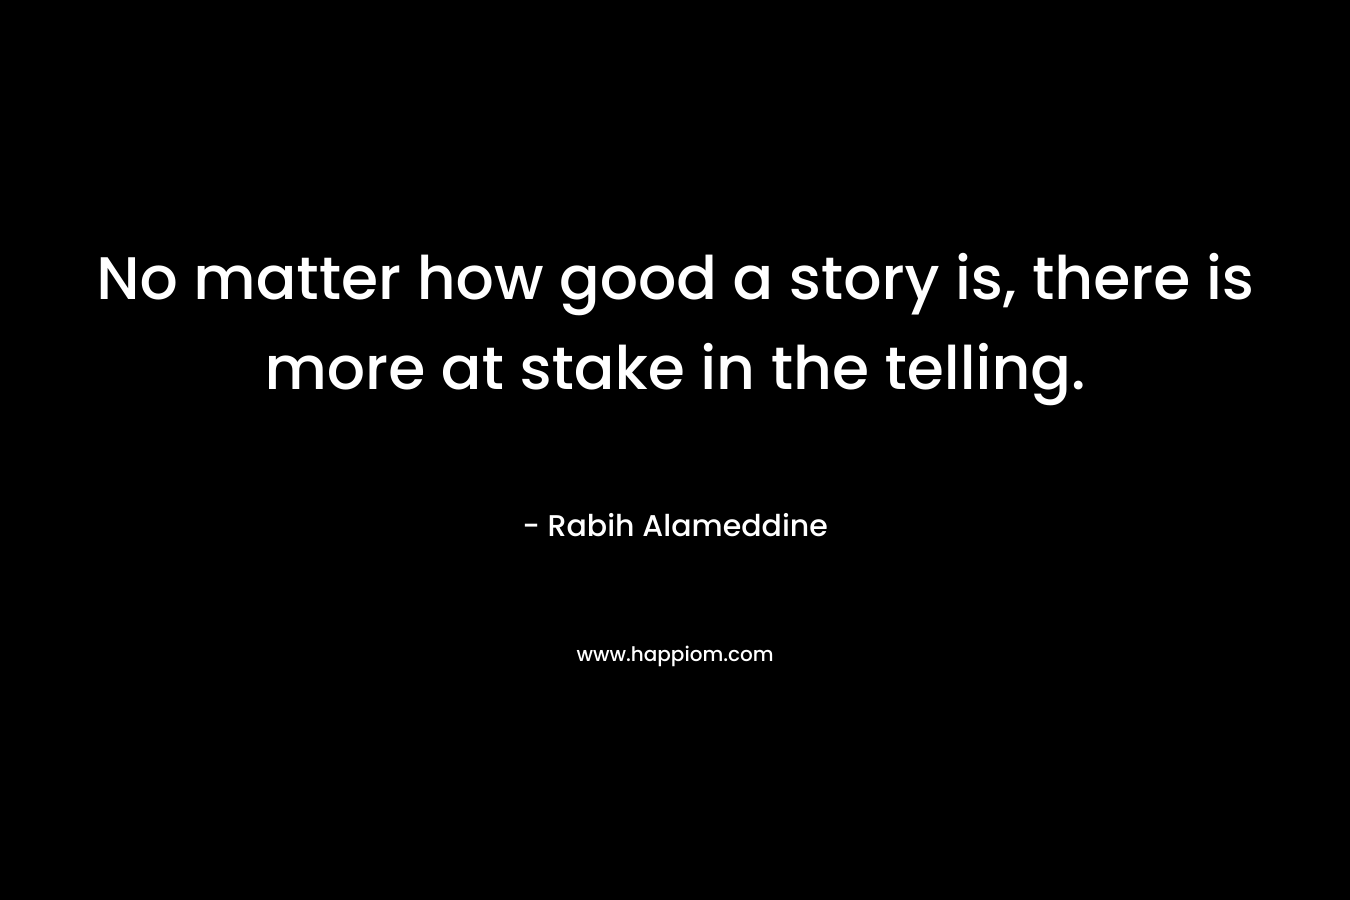 No matter how good a story is, there is more at stake in the telling. – Rabih Alameddine